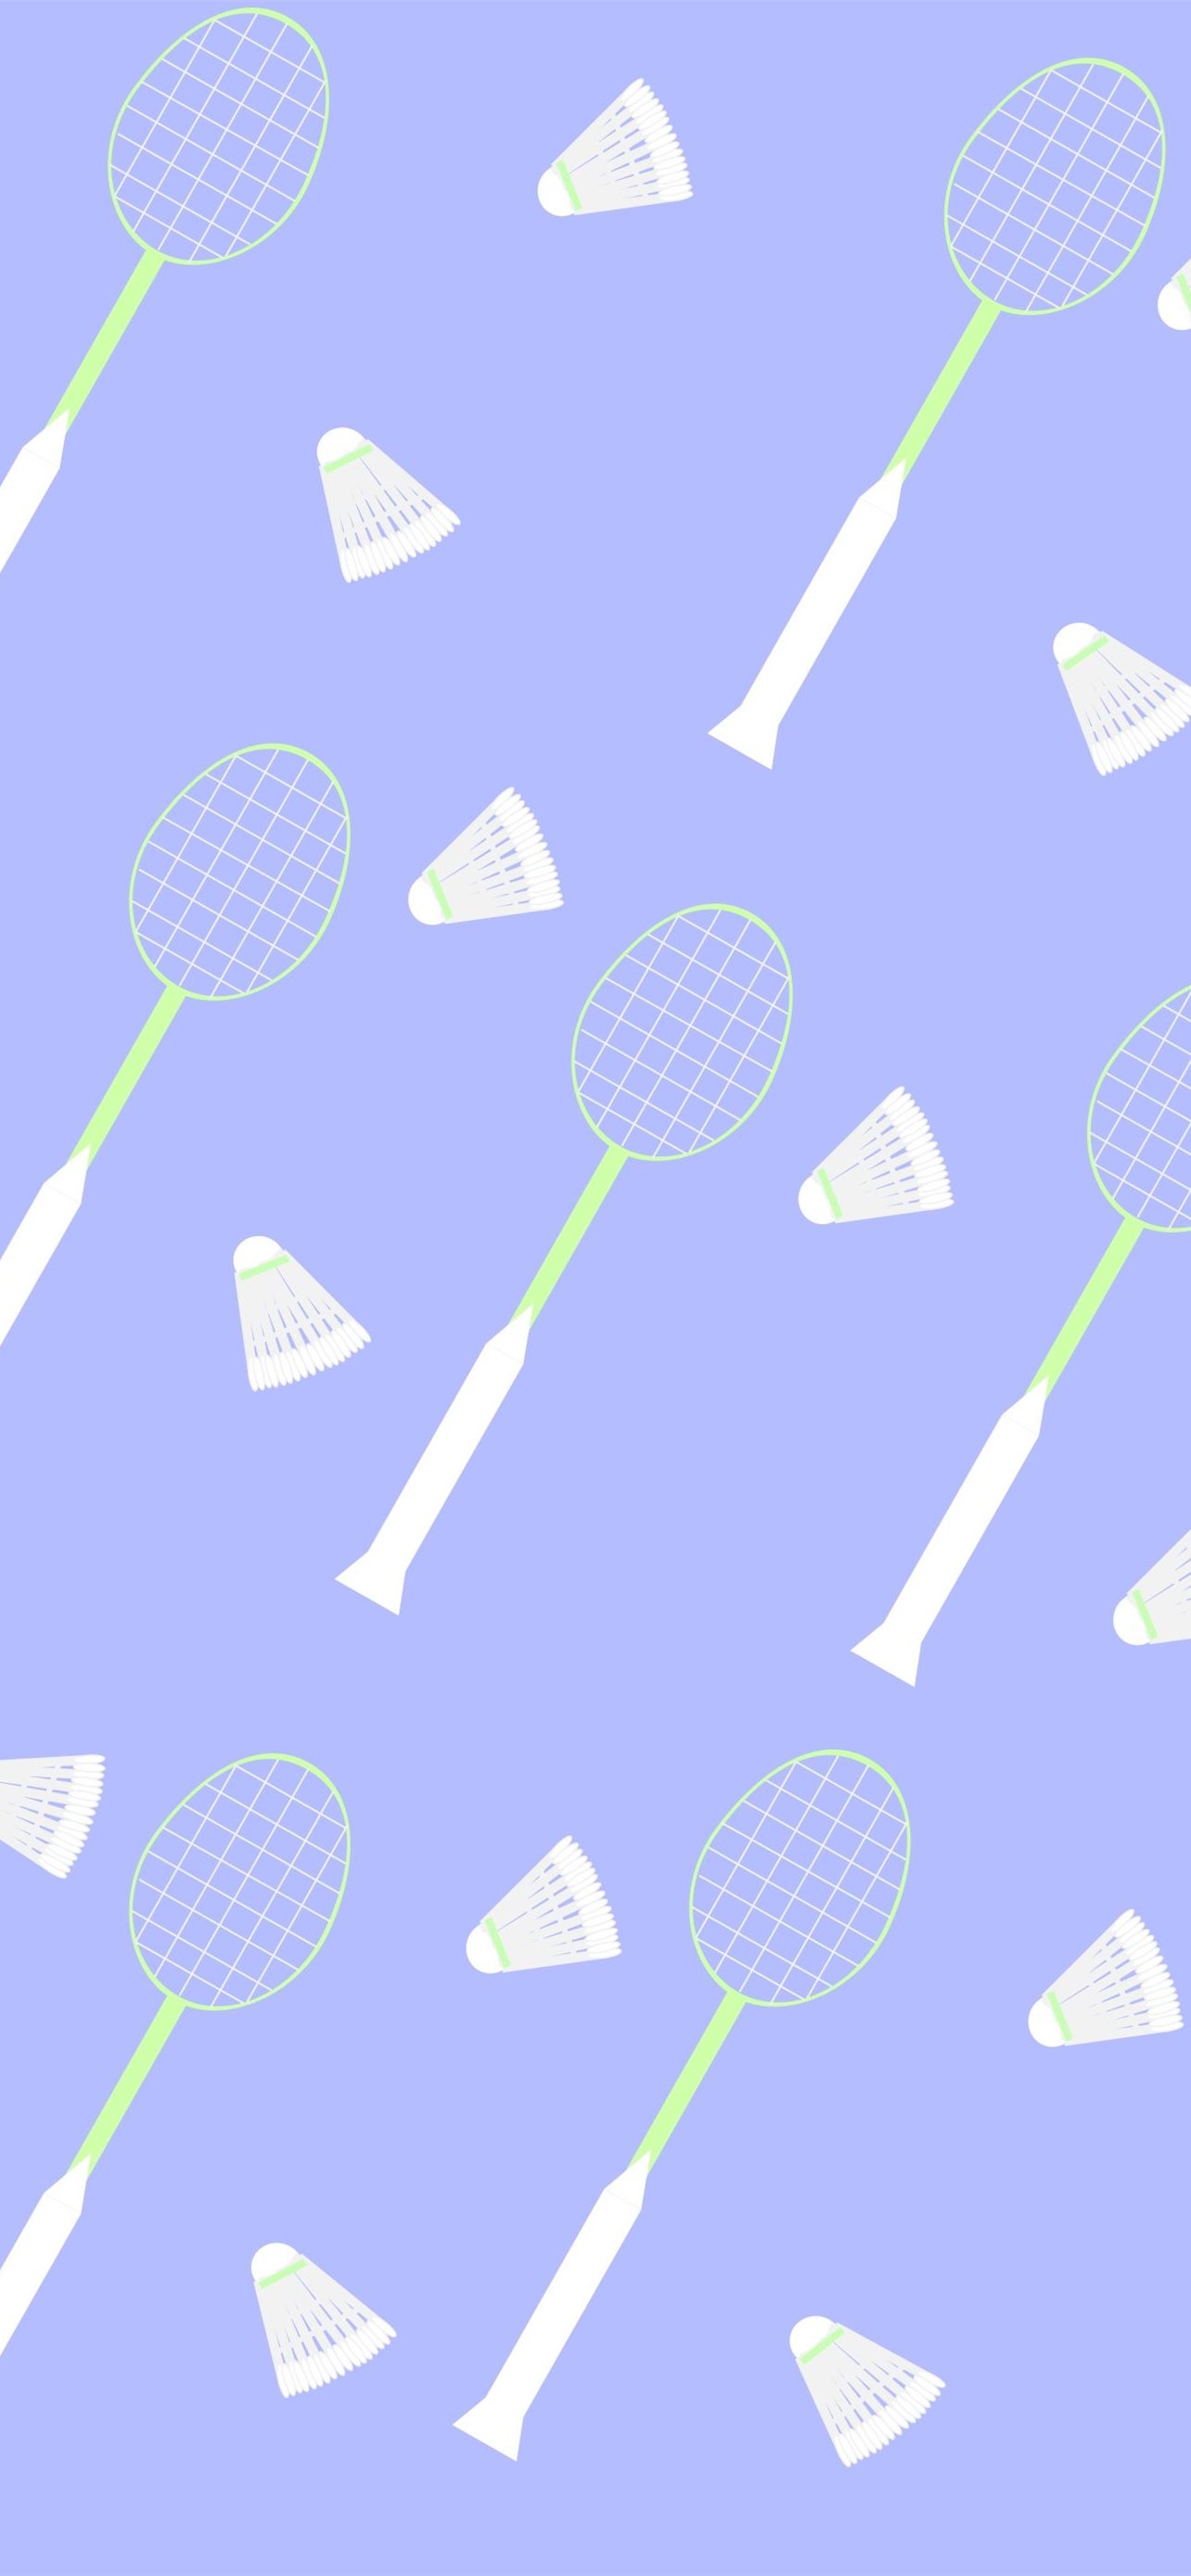 Badminton background iPhone Wallpapers Free Download